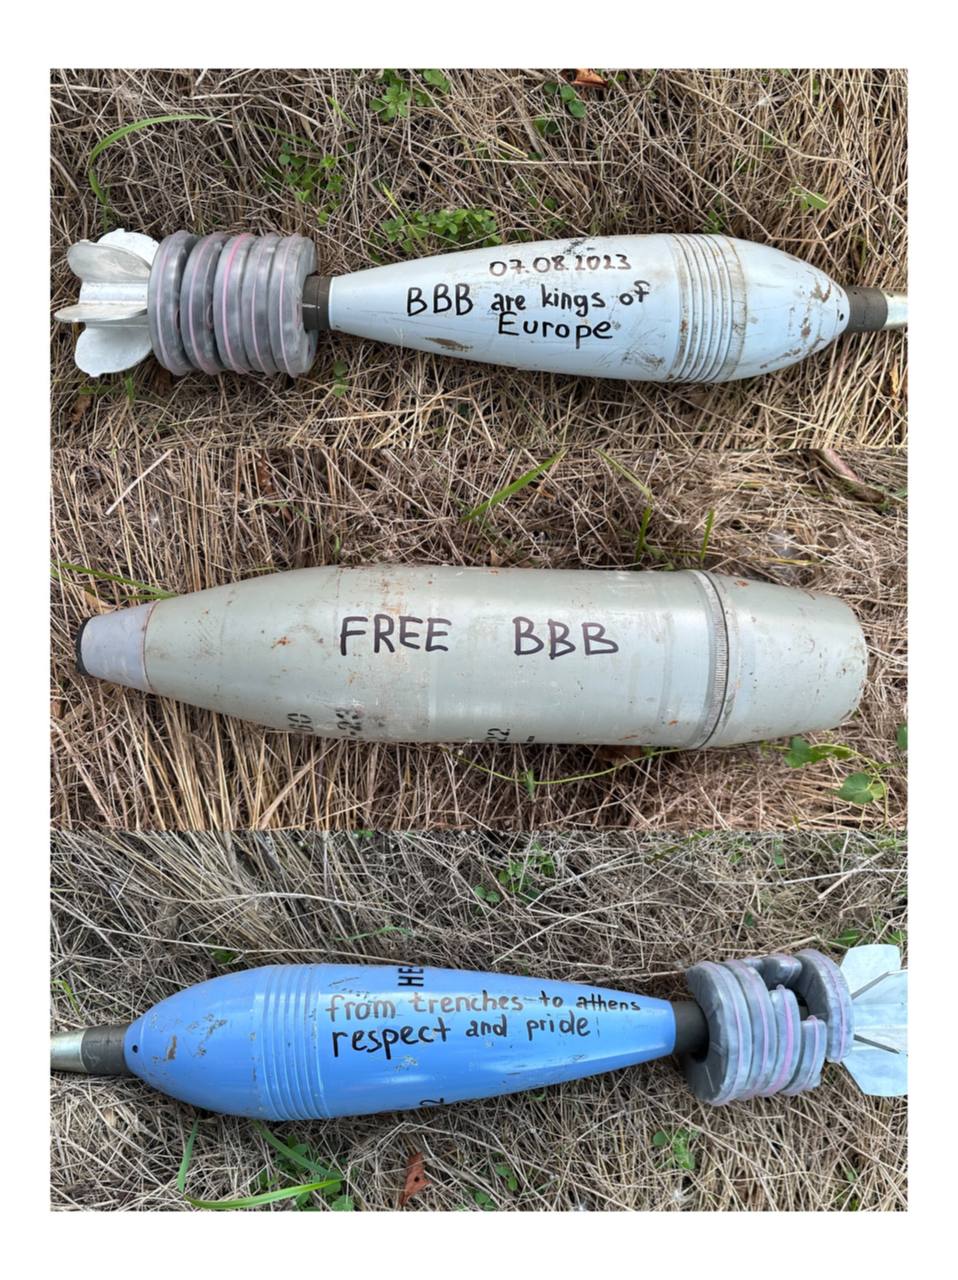 This picture shows three military shells on the Ukrainian front. The image was posted on a Telegram channel associated with the hooligan group of the Ukrainian football team Dynamo Zagreb. The first shell reads "BBB are kings of Europe", the second "FREE BBB" and the third "From trenches to Athens respect and pride". 